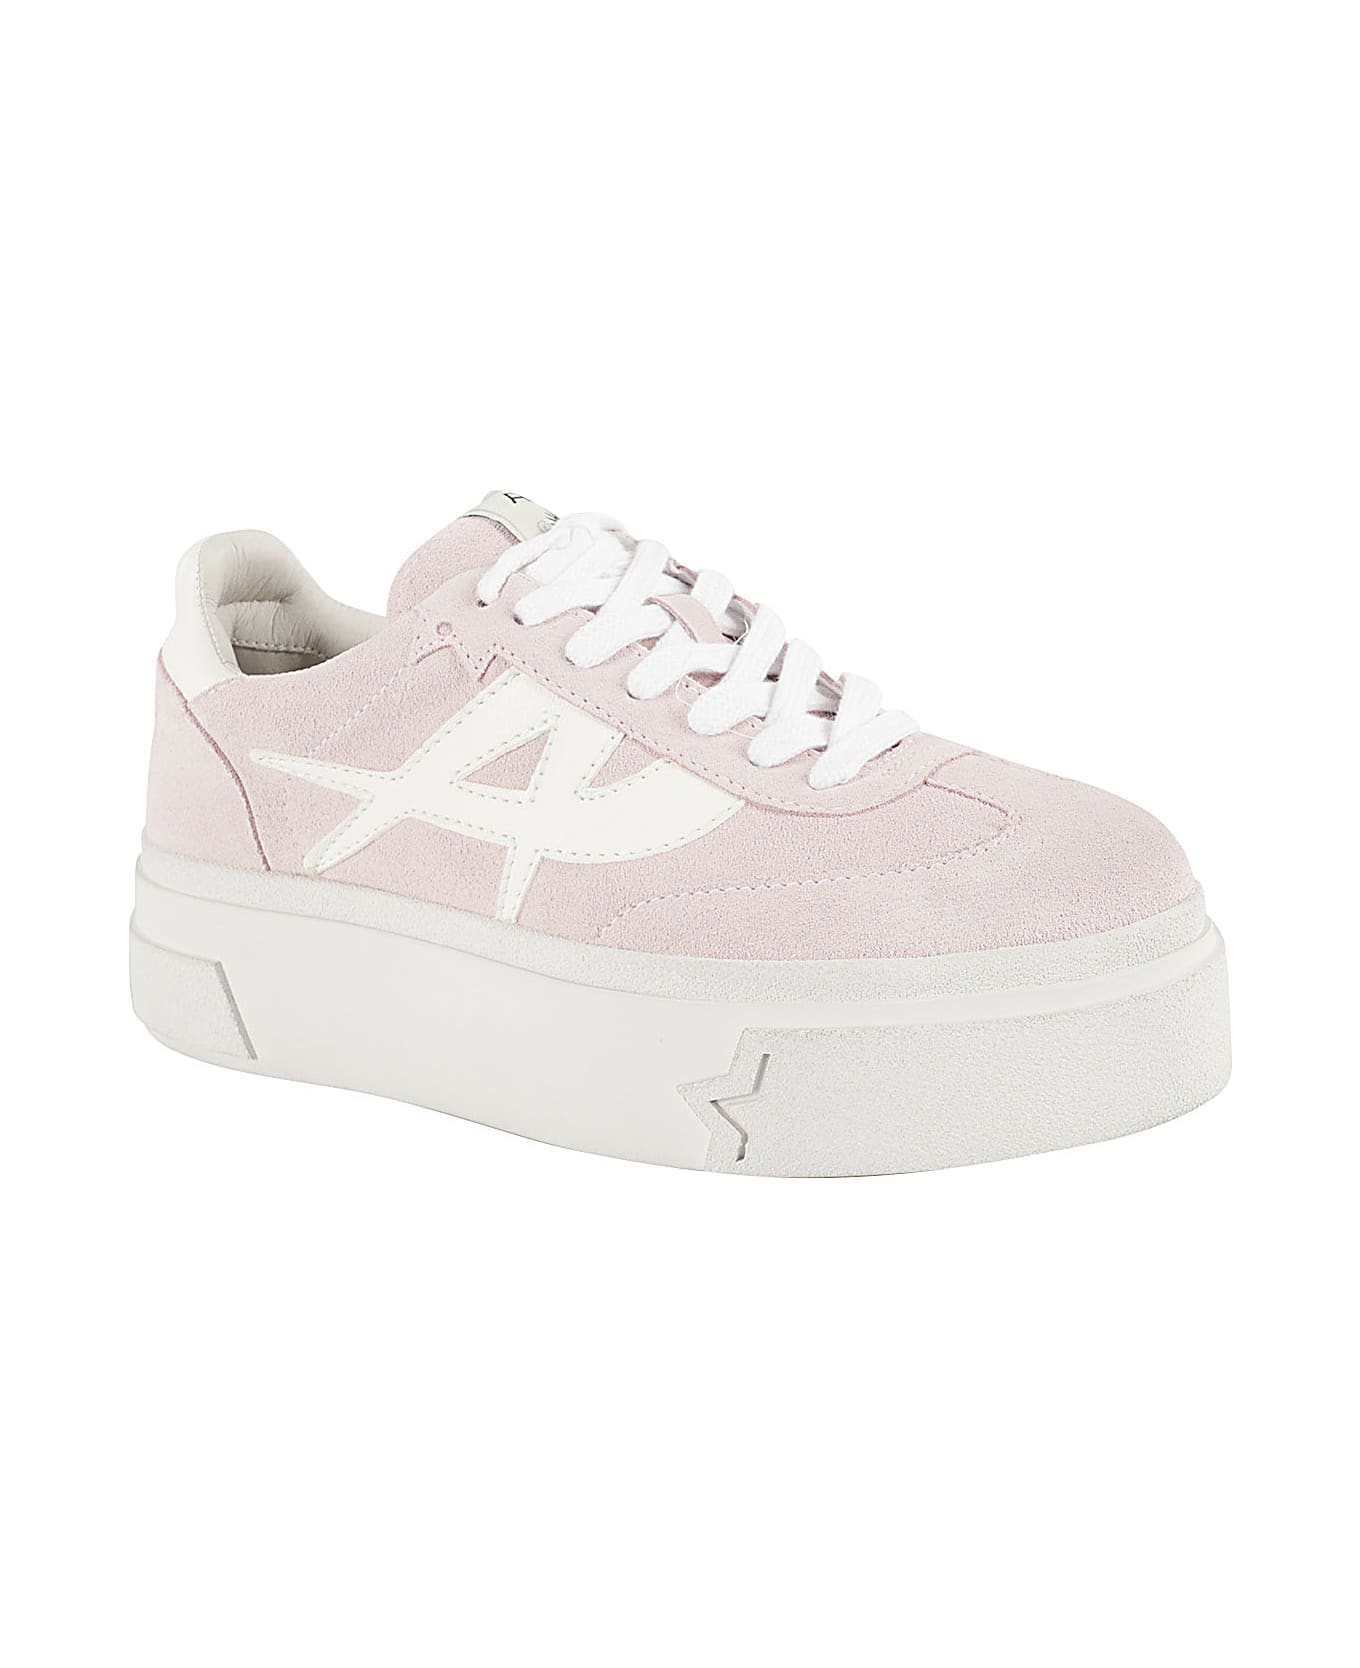 Ash Calf Suede Crystal - Rose Wht